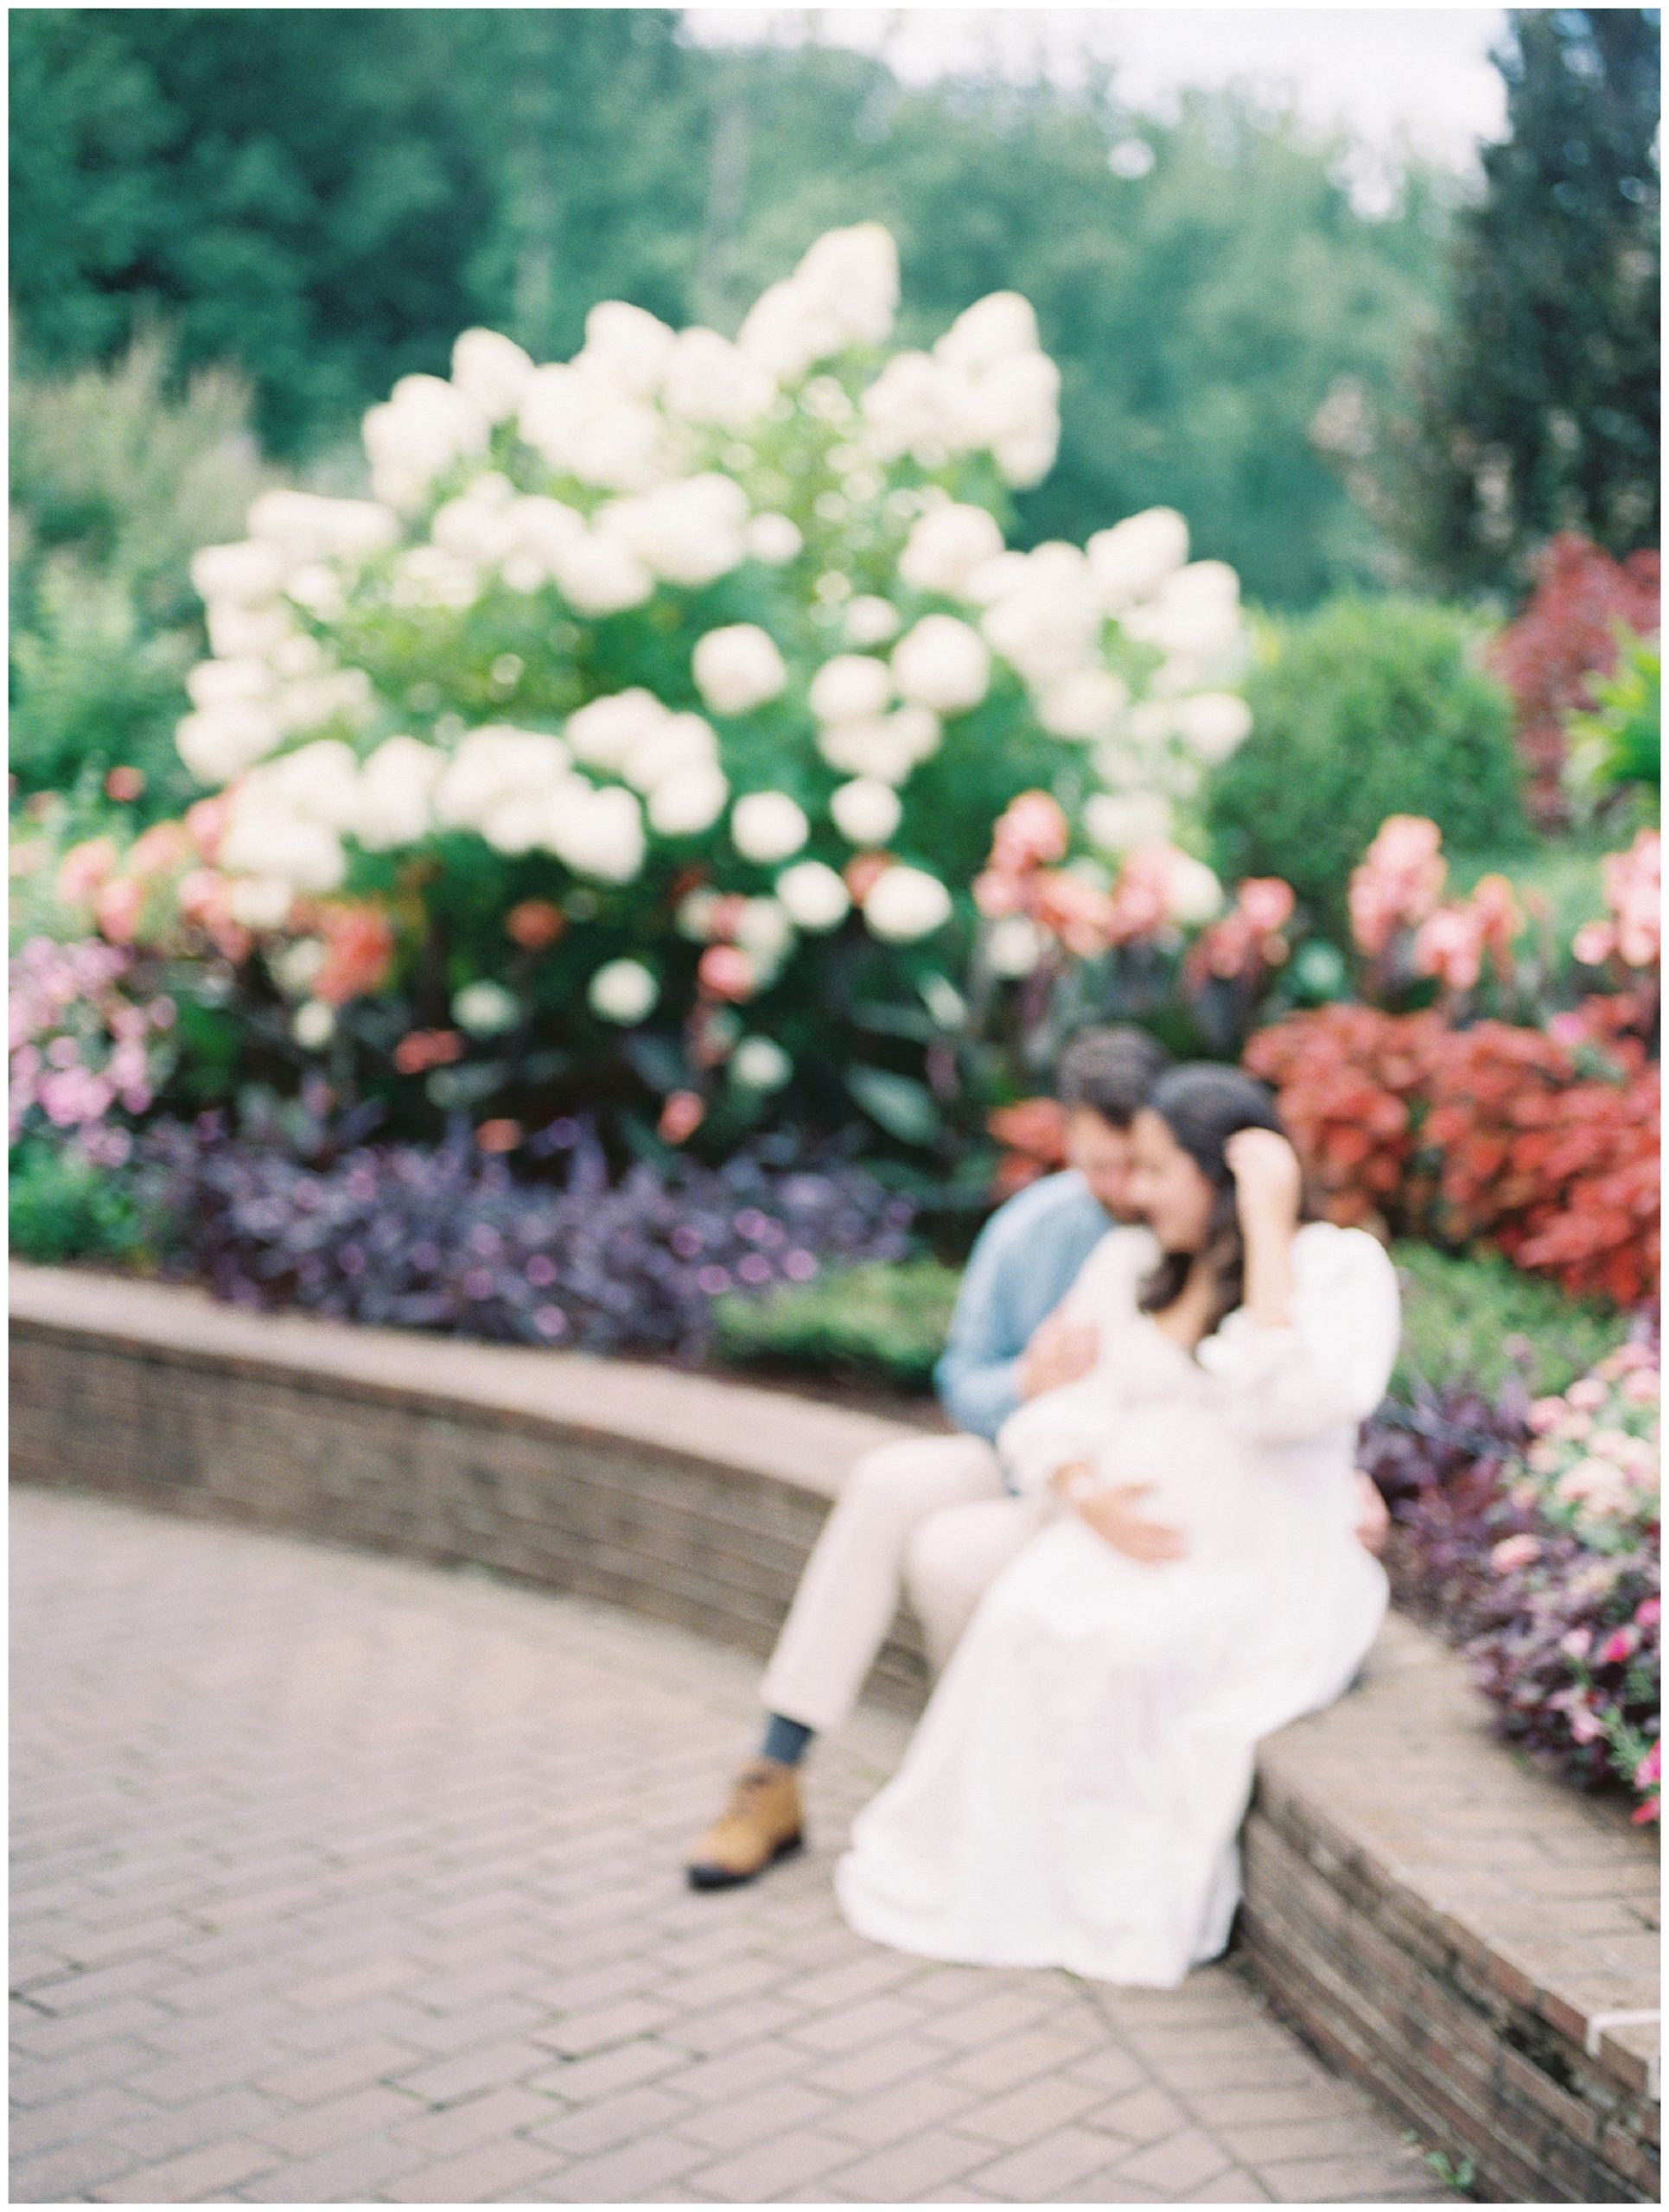 Out-of-focus image of couple sitting on brick wall in front of flowers at Brookside Gardens.